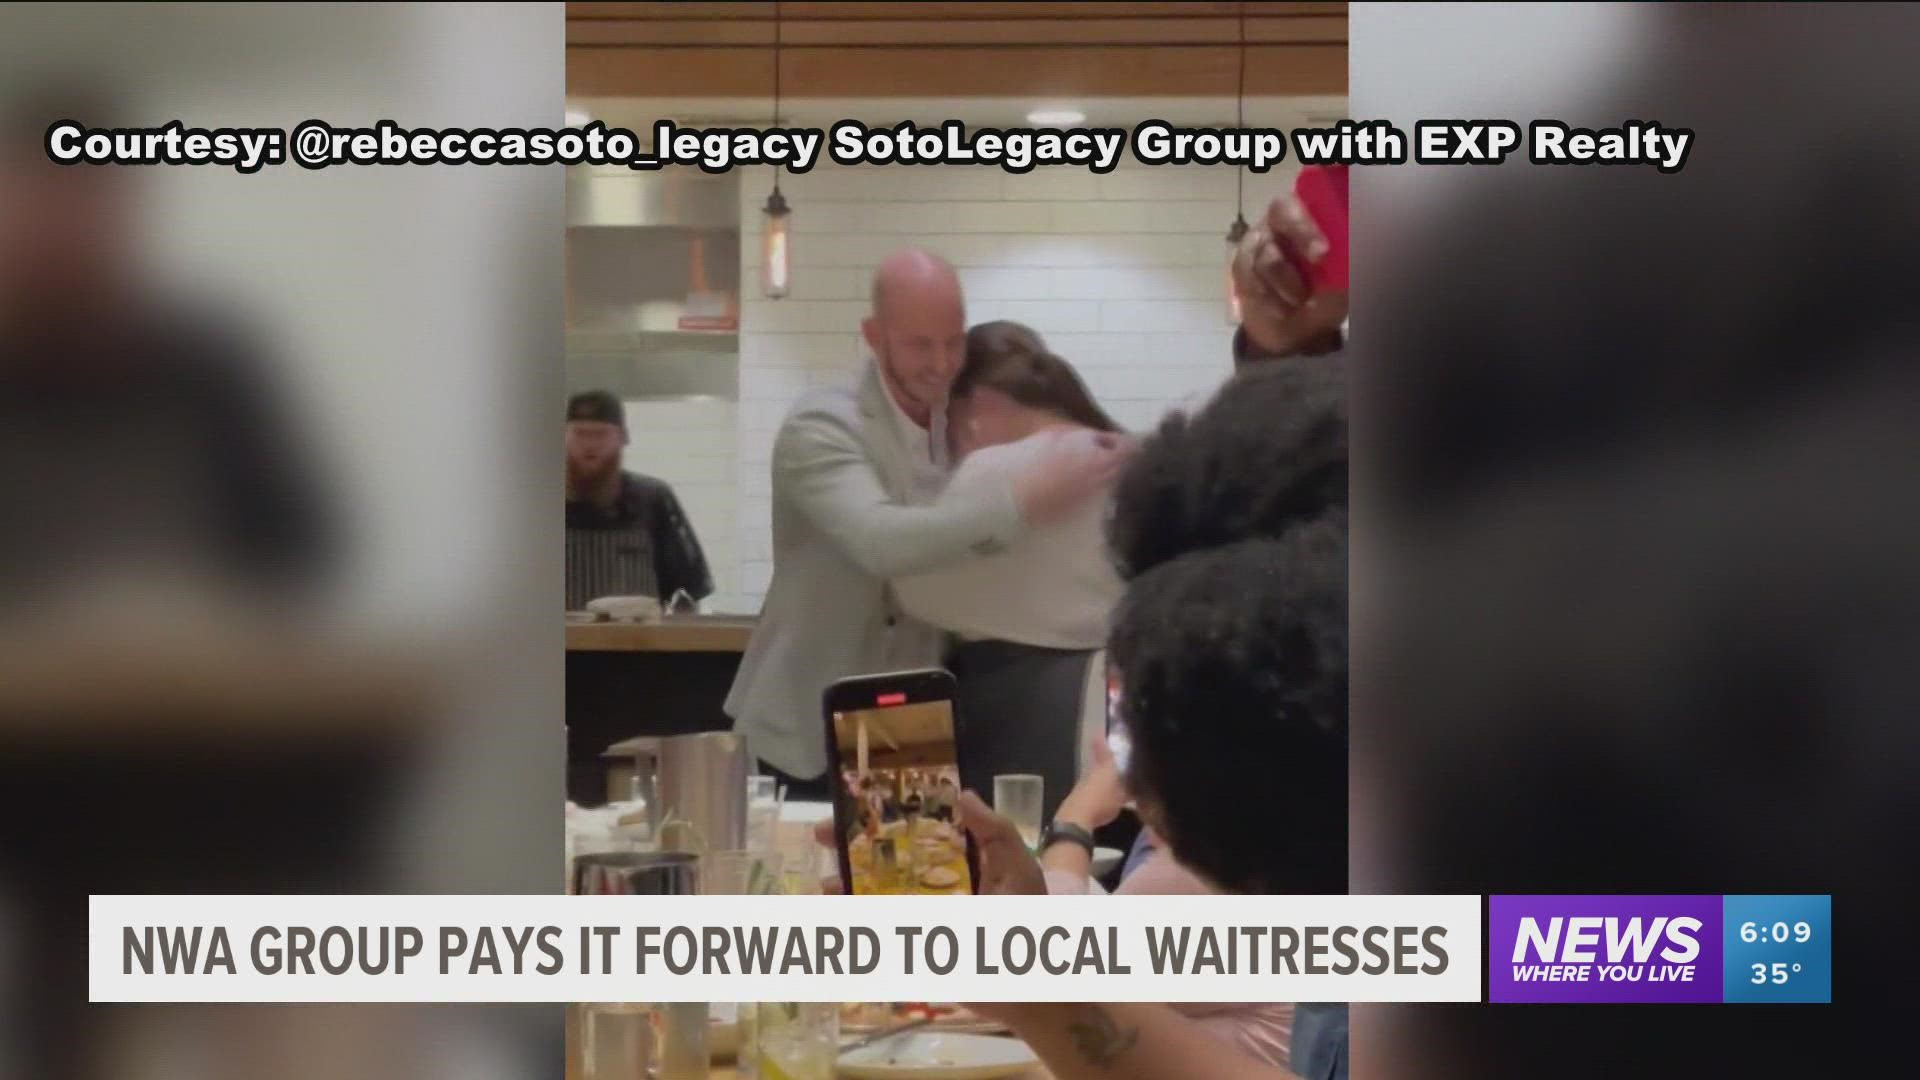 Two local waitresses received a tip for $4,400 from conference-goers visiting the area for business.